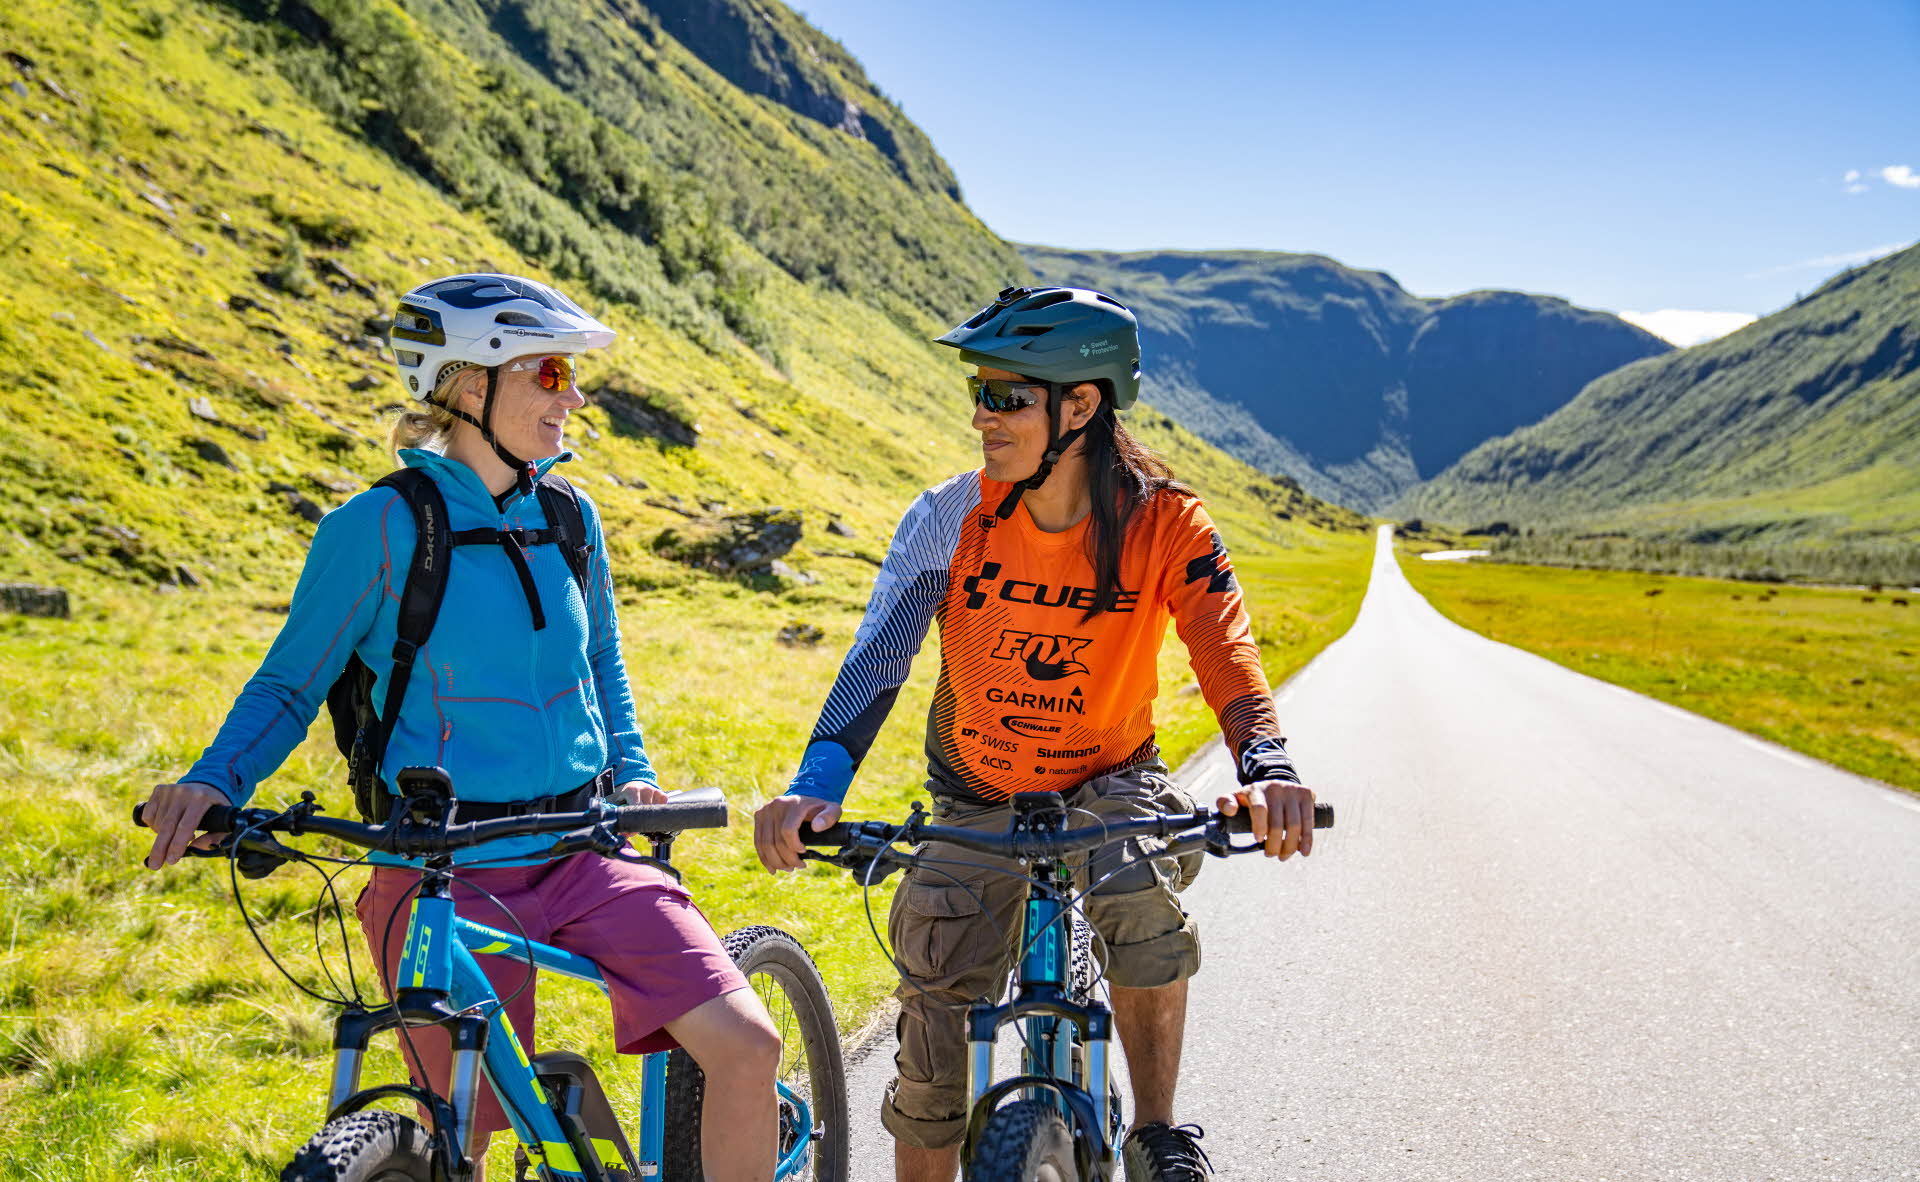 A woman and a man taking a break on their bicycles on a mountainous road towards Vikafjell